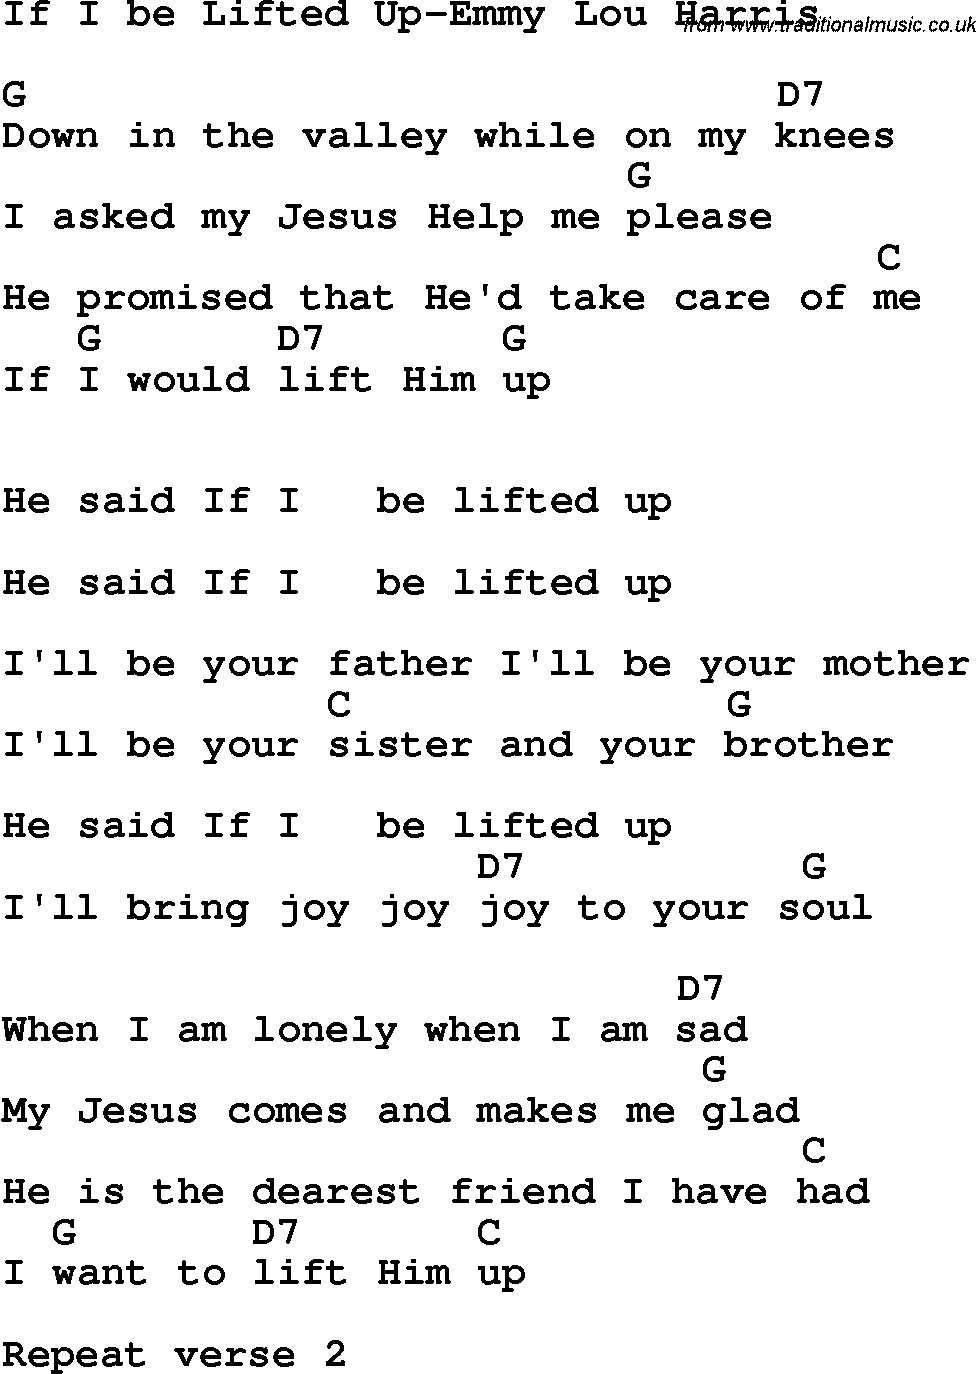 Country, Southern and Bluegrass Gospel Song If I be Lifted Up-Emmy Lou Harris lyrics and chords